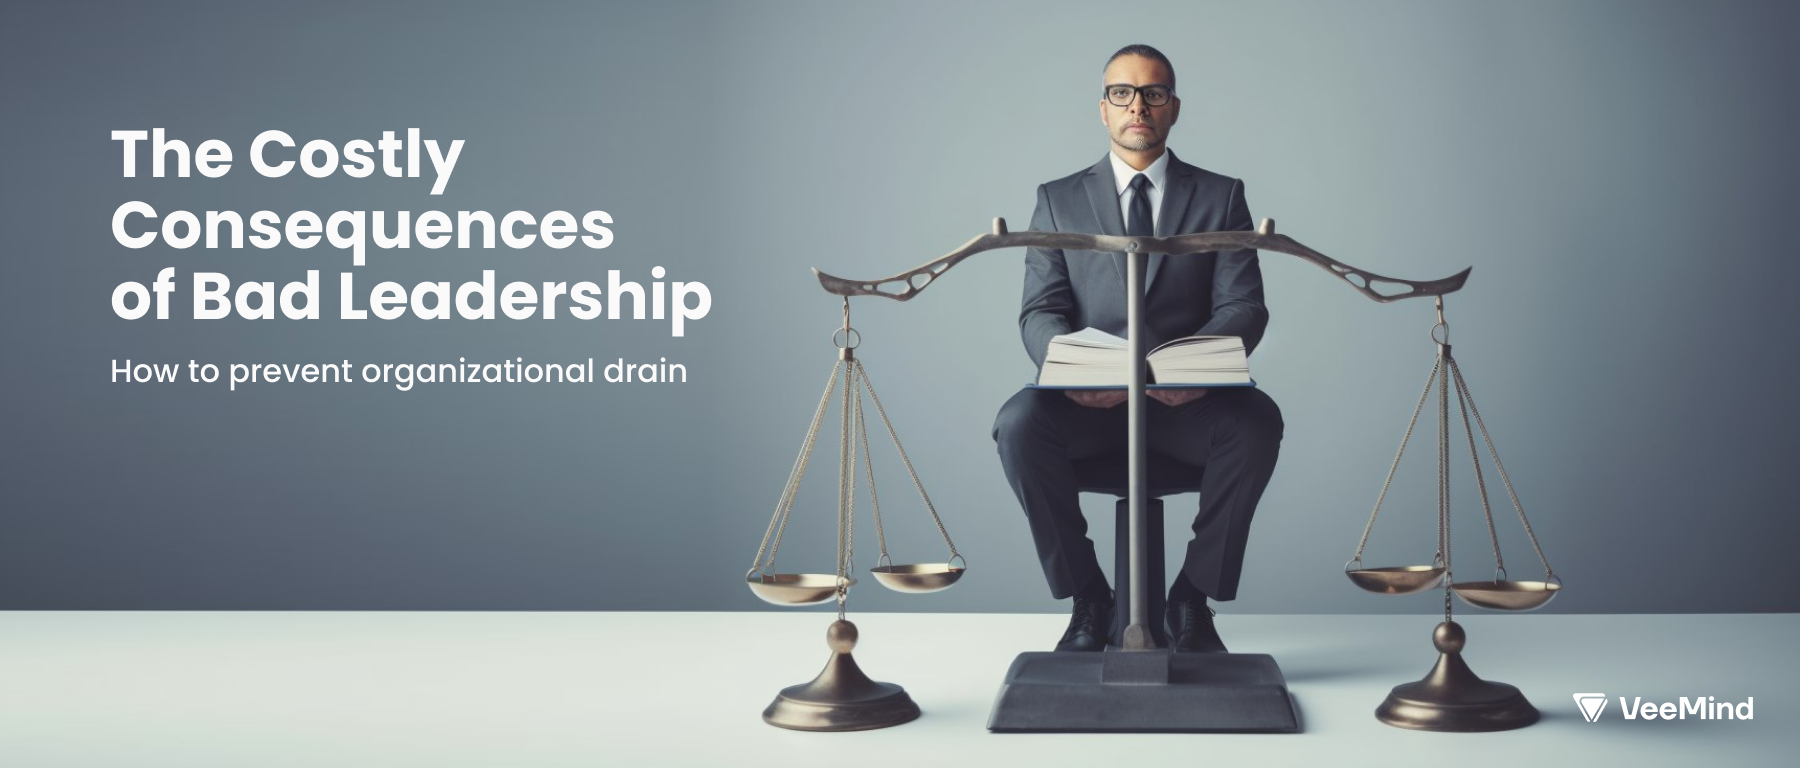 The Costly Consequences of Bad Leadership: How to Prevent Organizational Drain